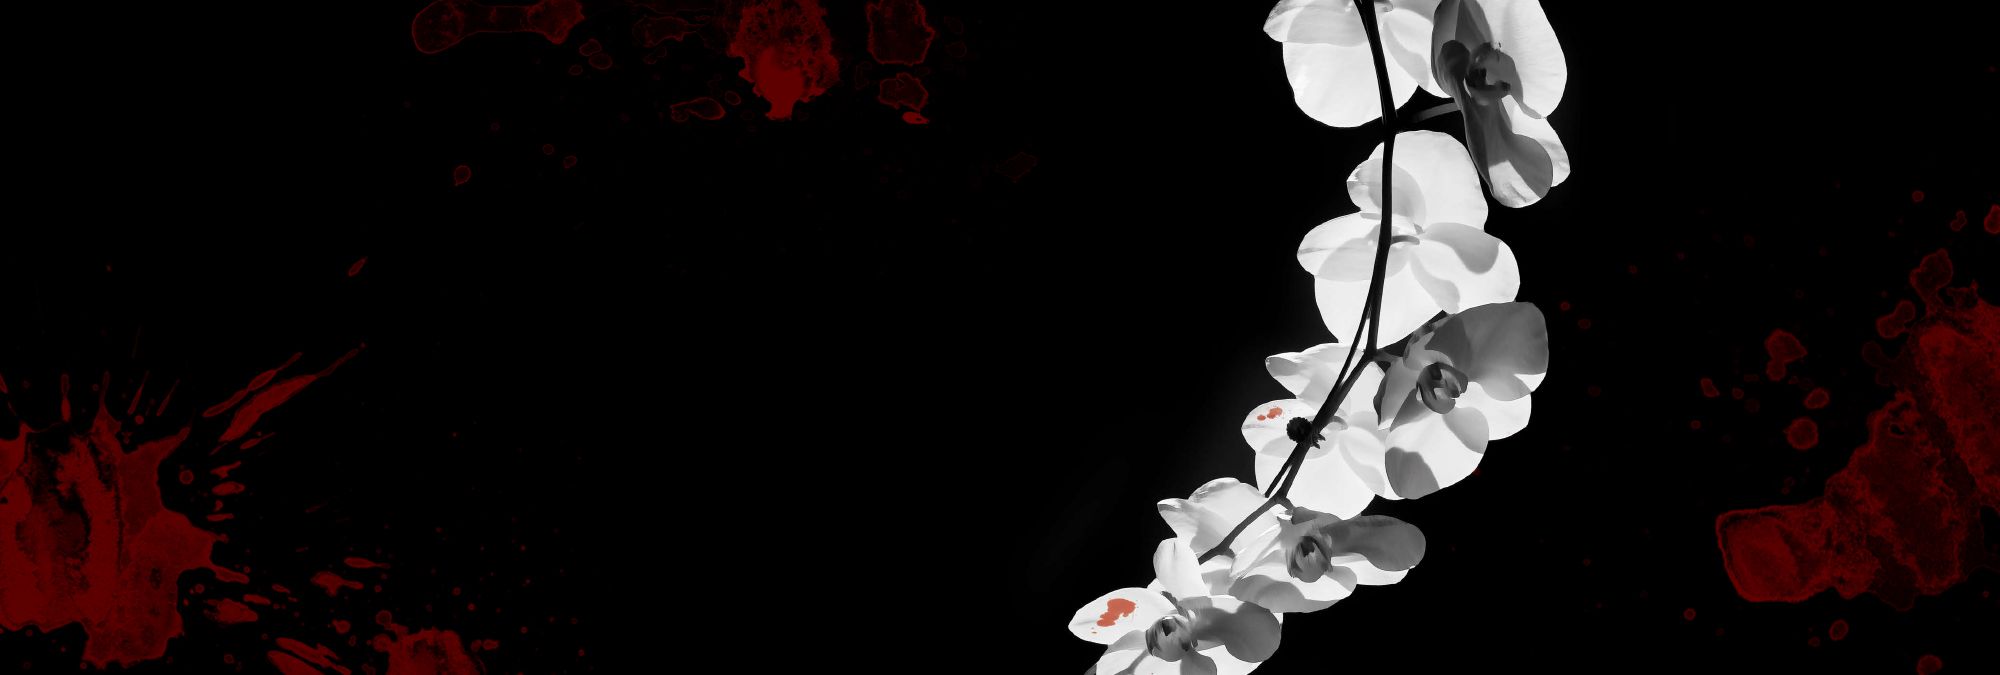 a black background with red blots and white flowers 